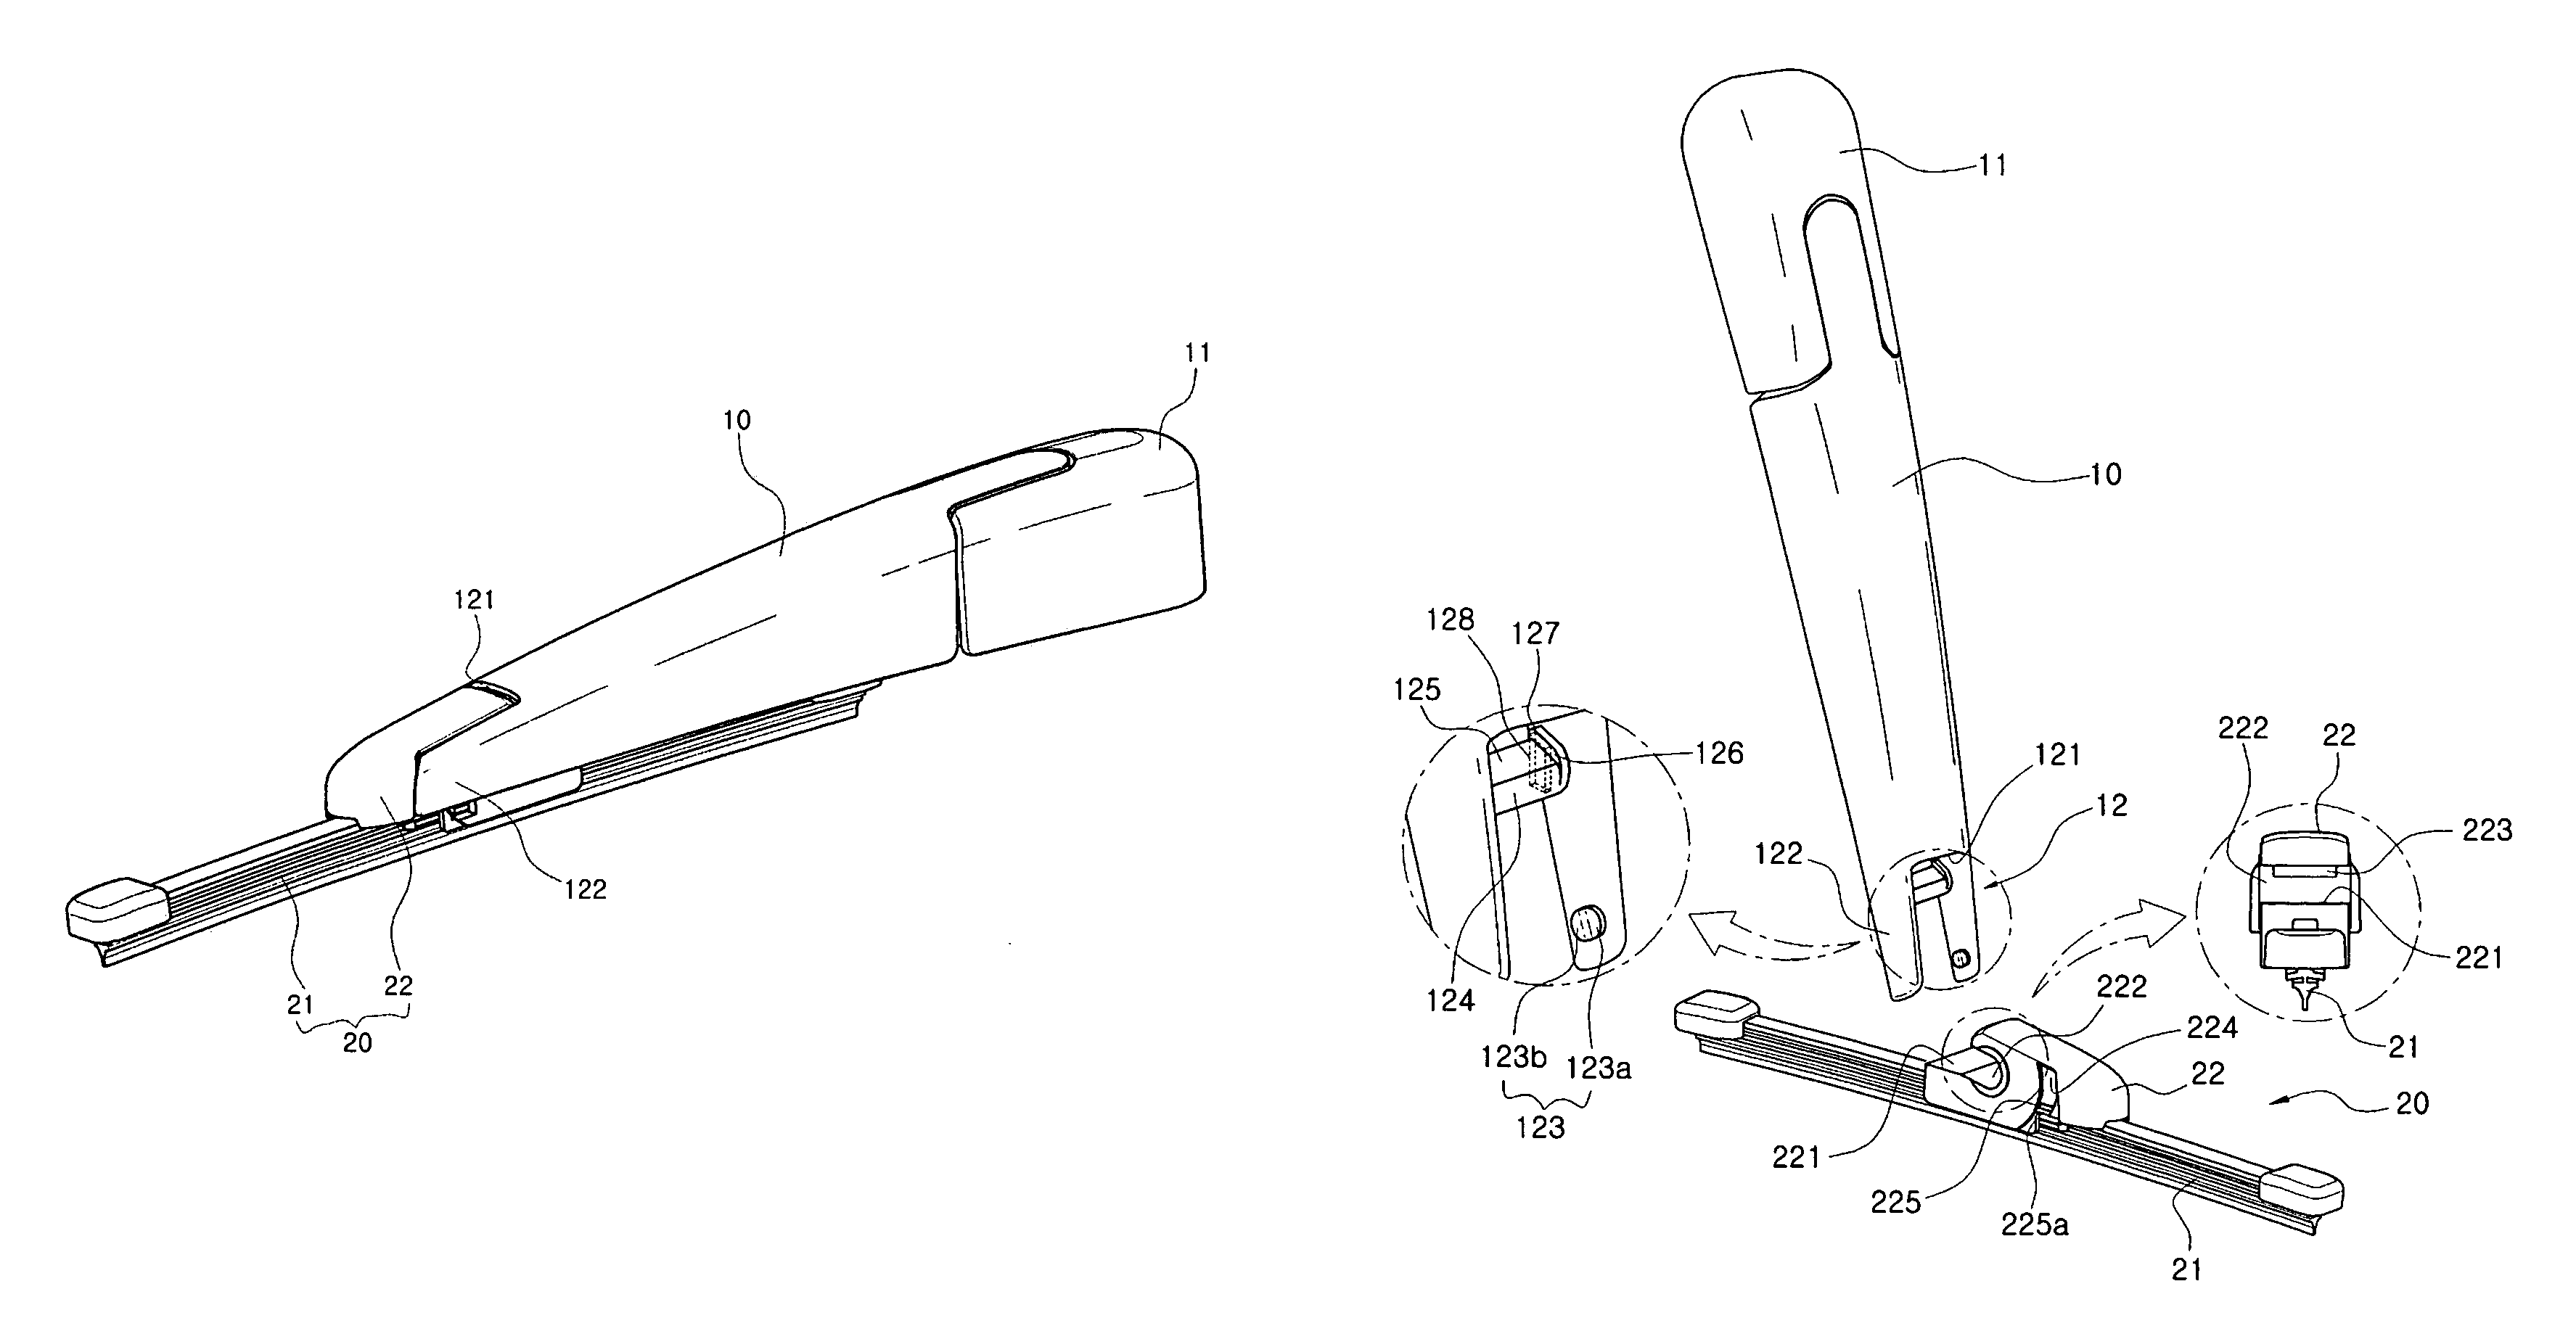 Connecting device for connecting wiper blade to wiper arm